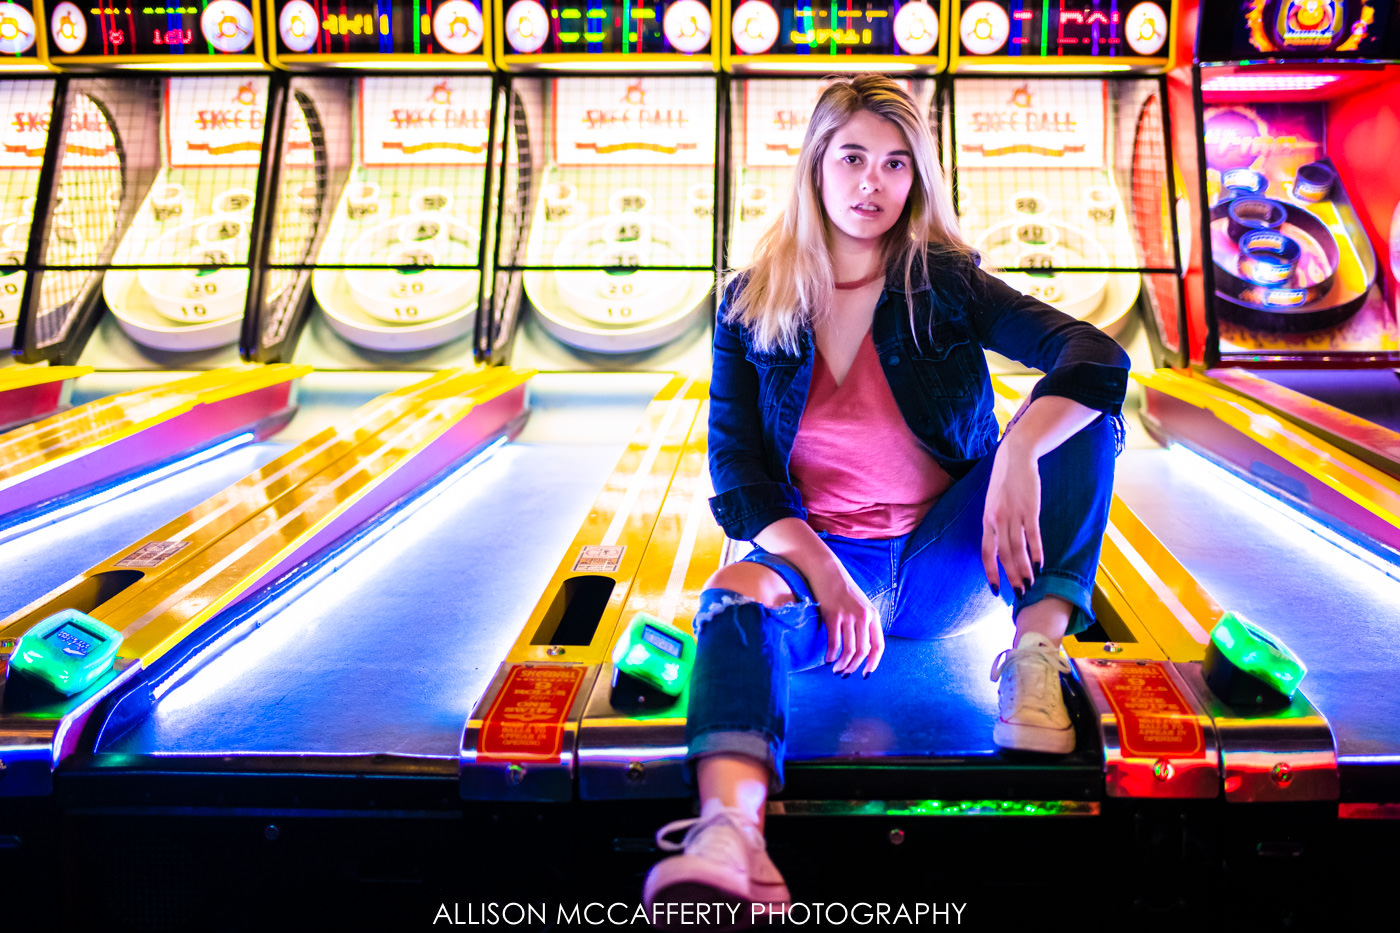 Photoshoot done inside Dave and Busters